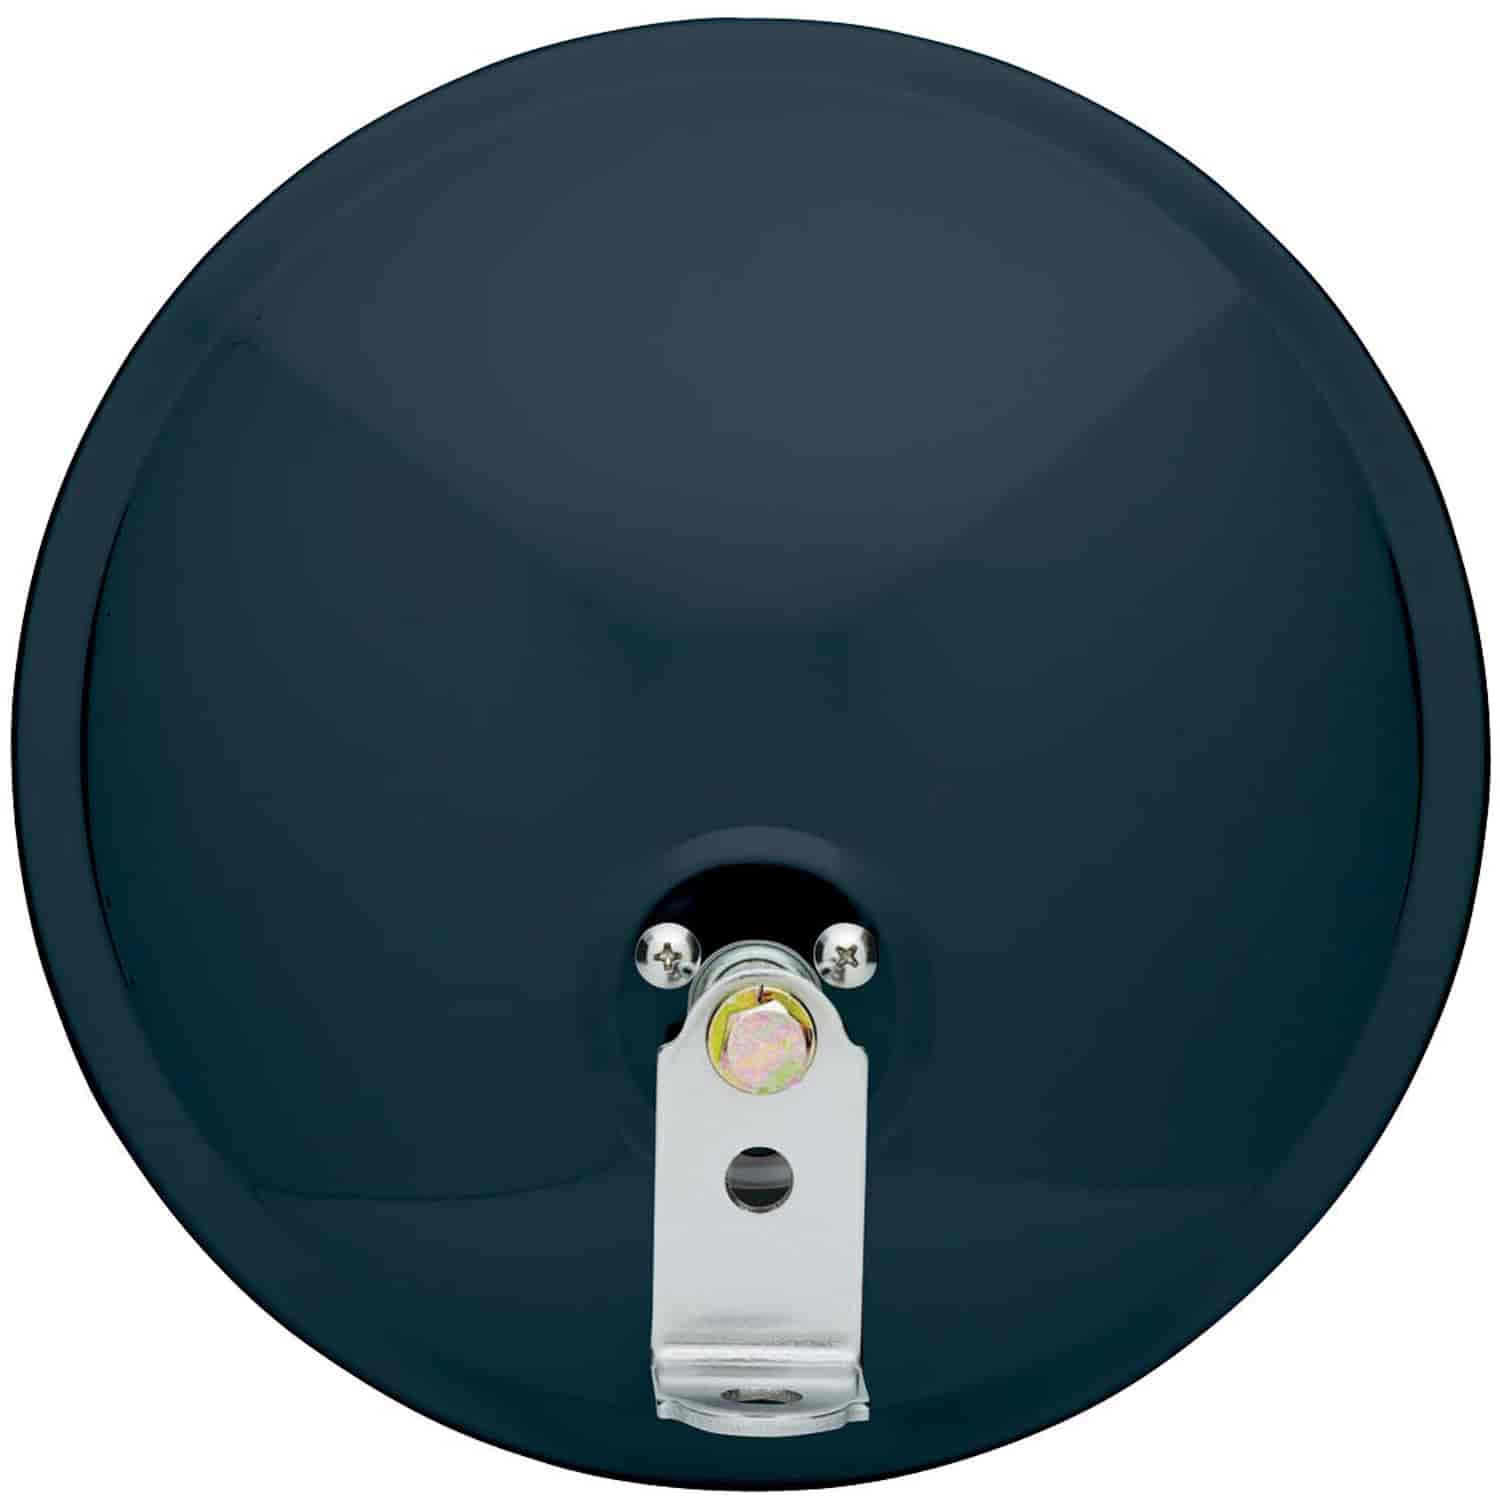 Clamp on Spot Mirror HD 8 1/2 round convex blk heated Easy Clamp-on Installation Convex Lens increases visibility.